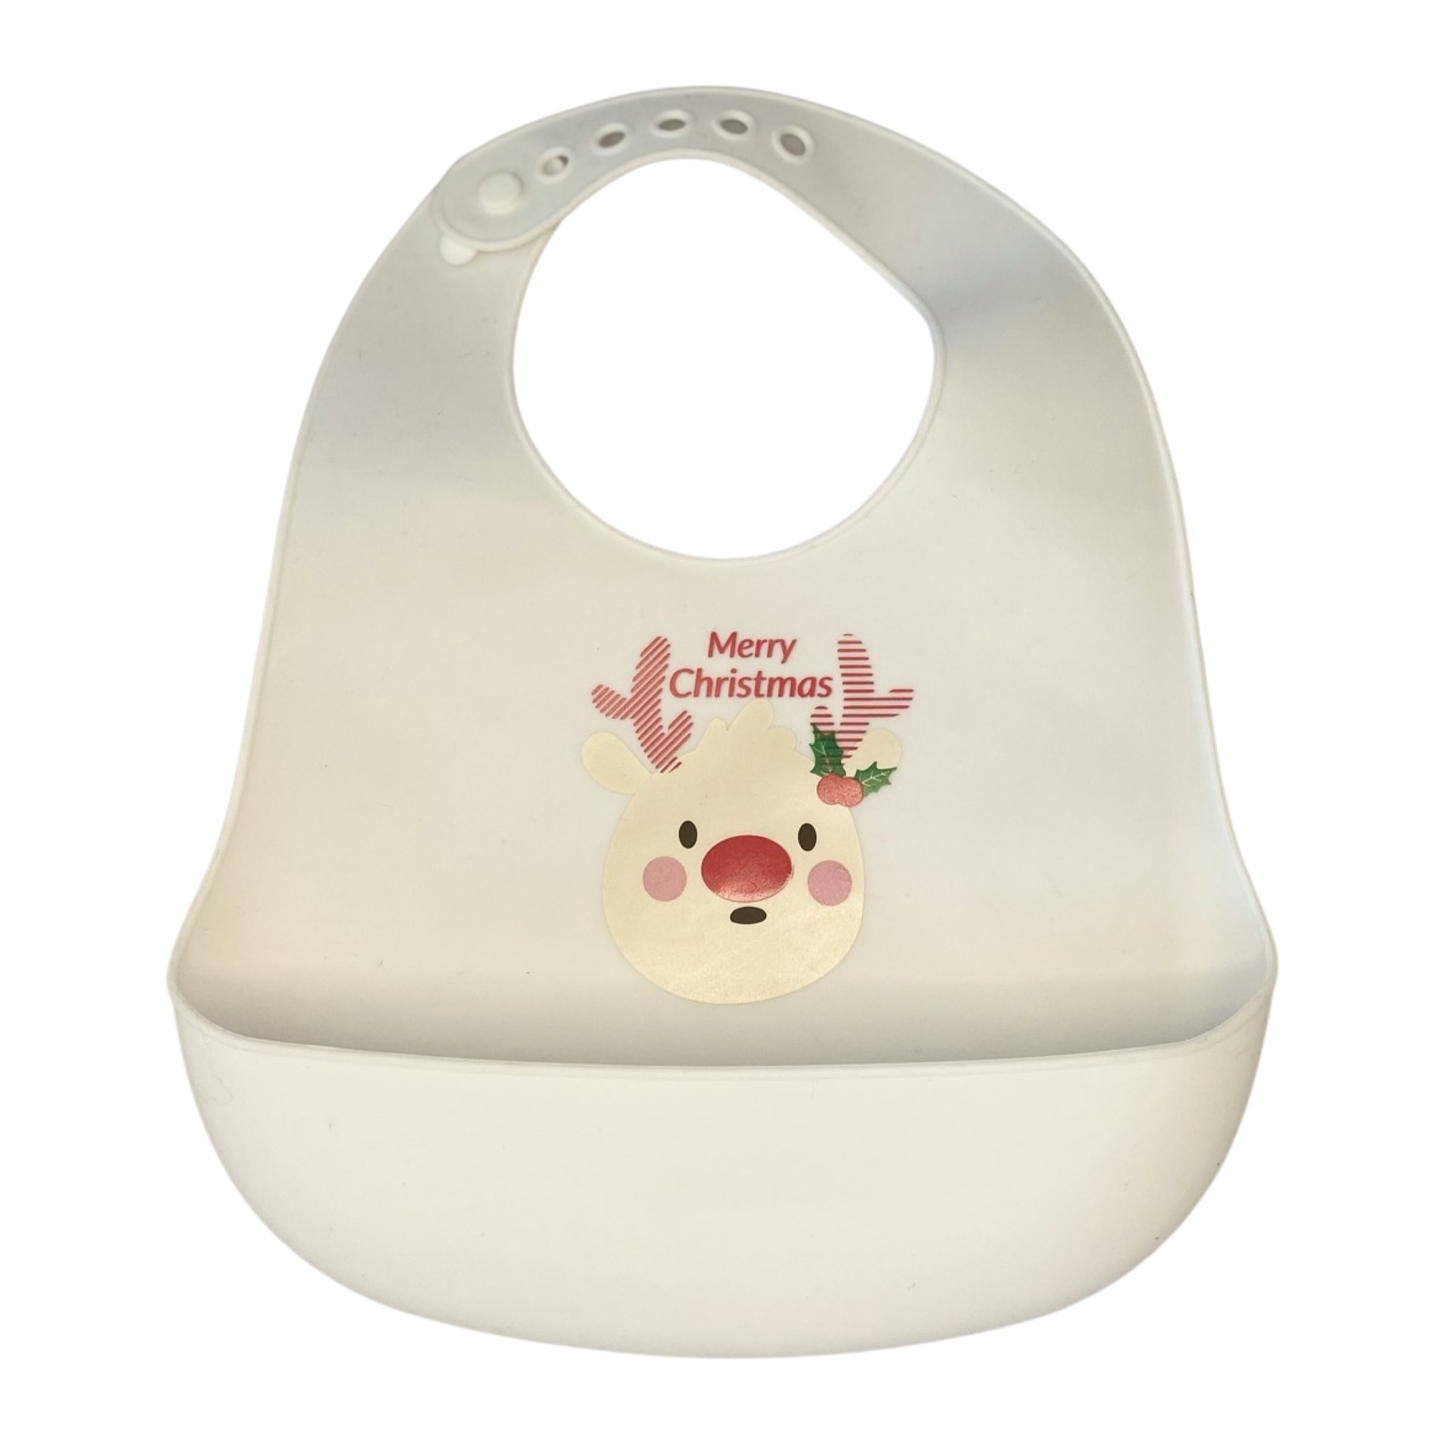 My First Christmas Baby Gift Set | Pink Deer